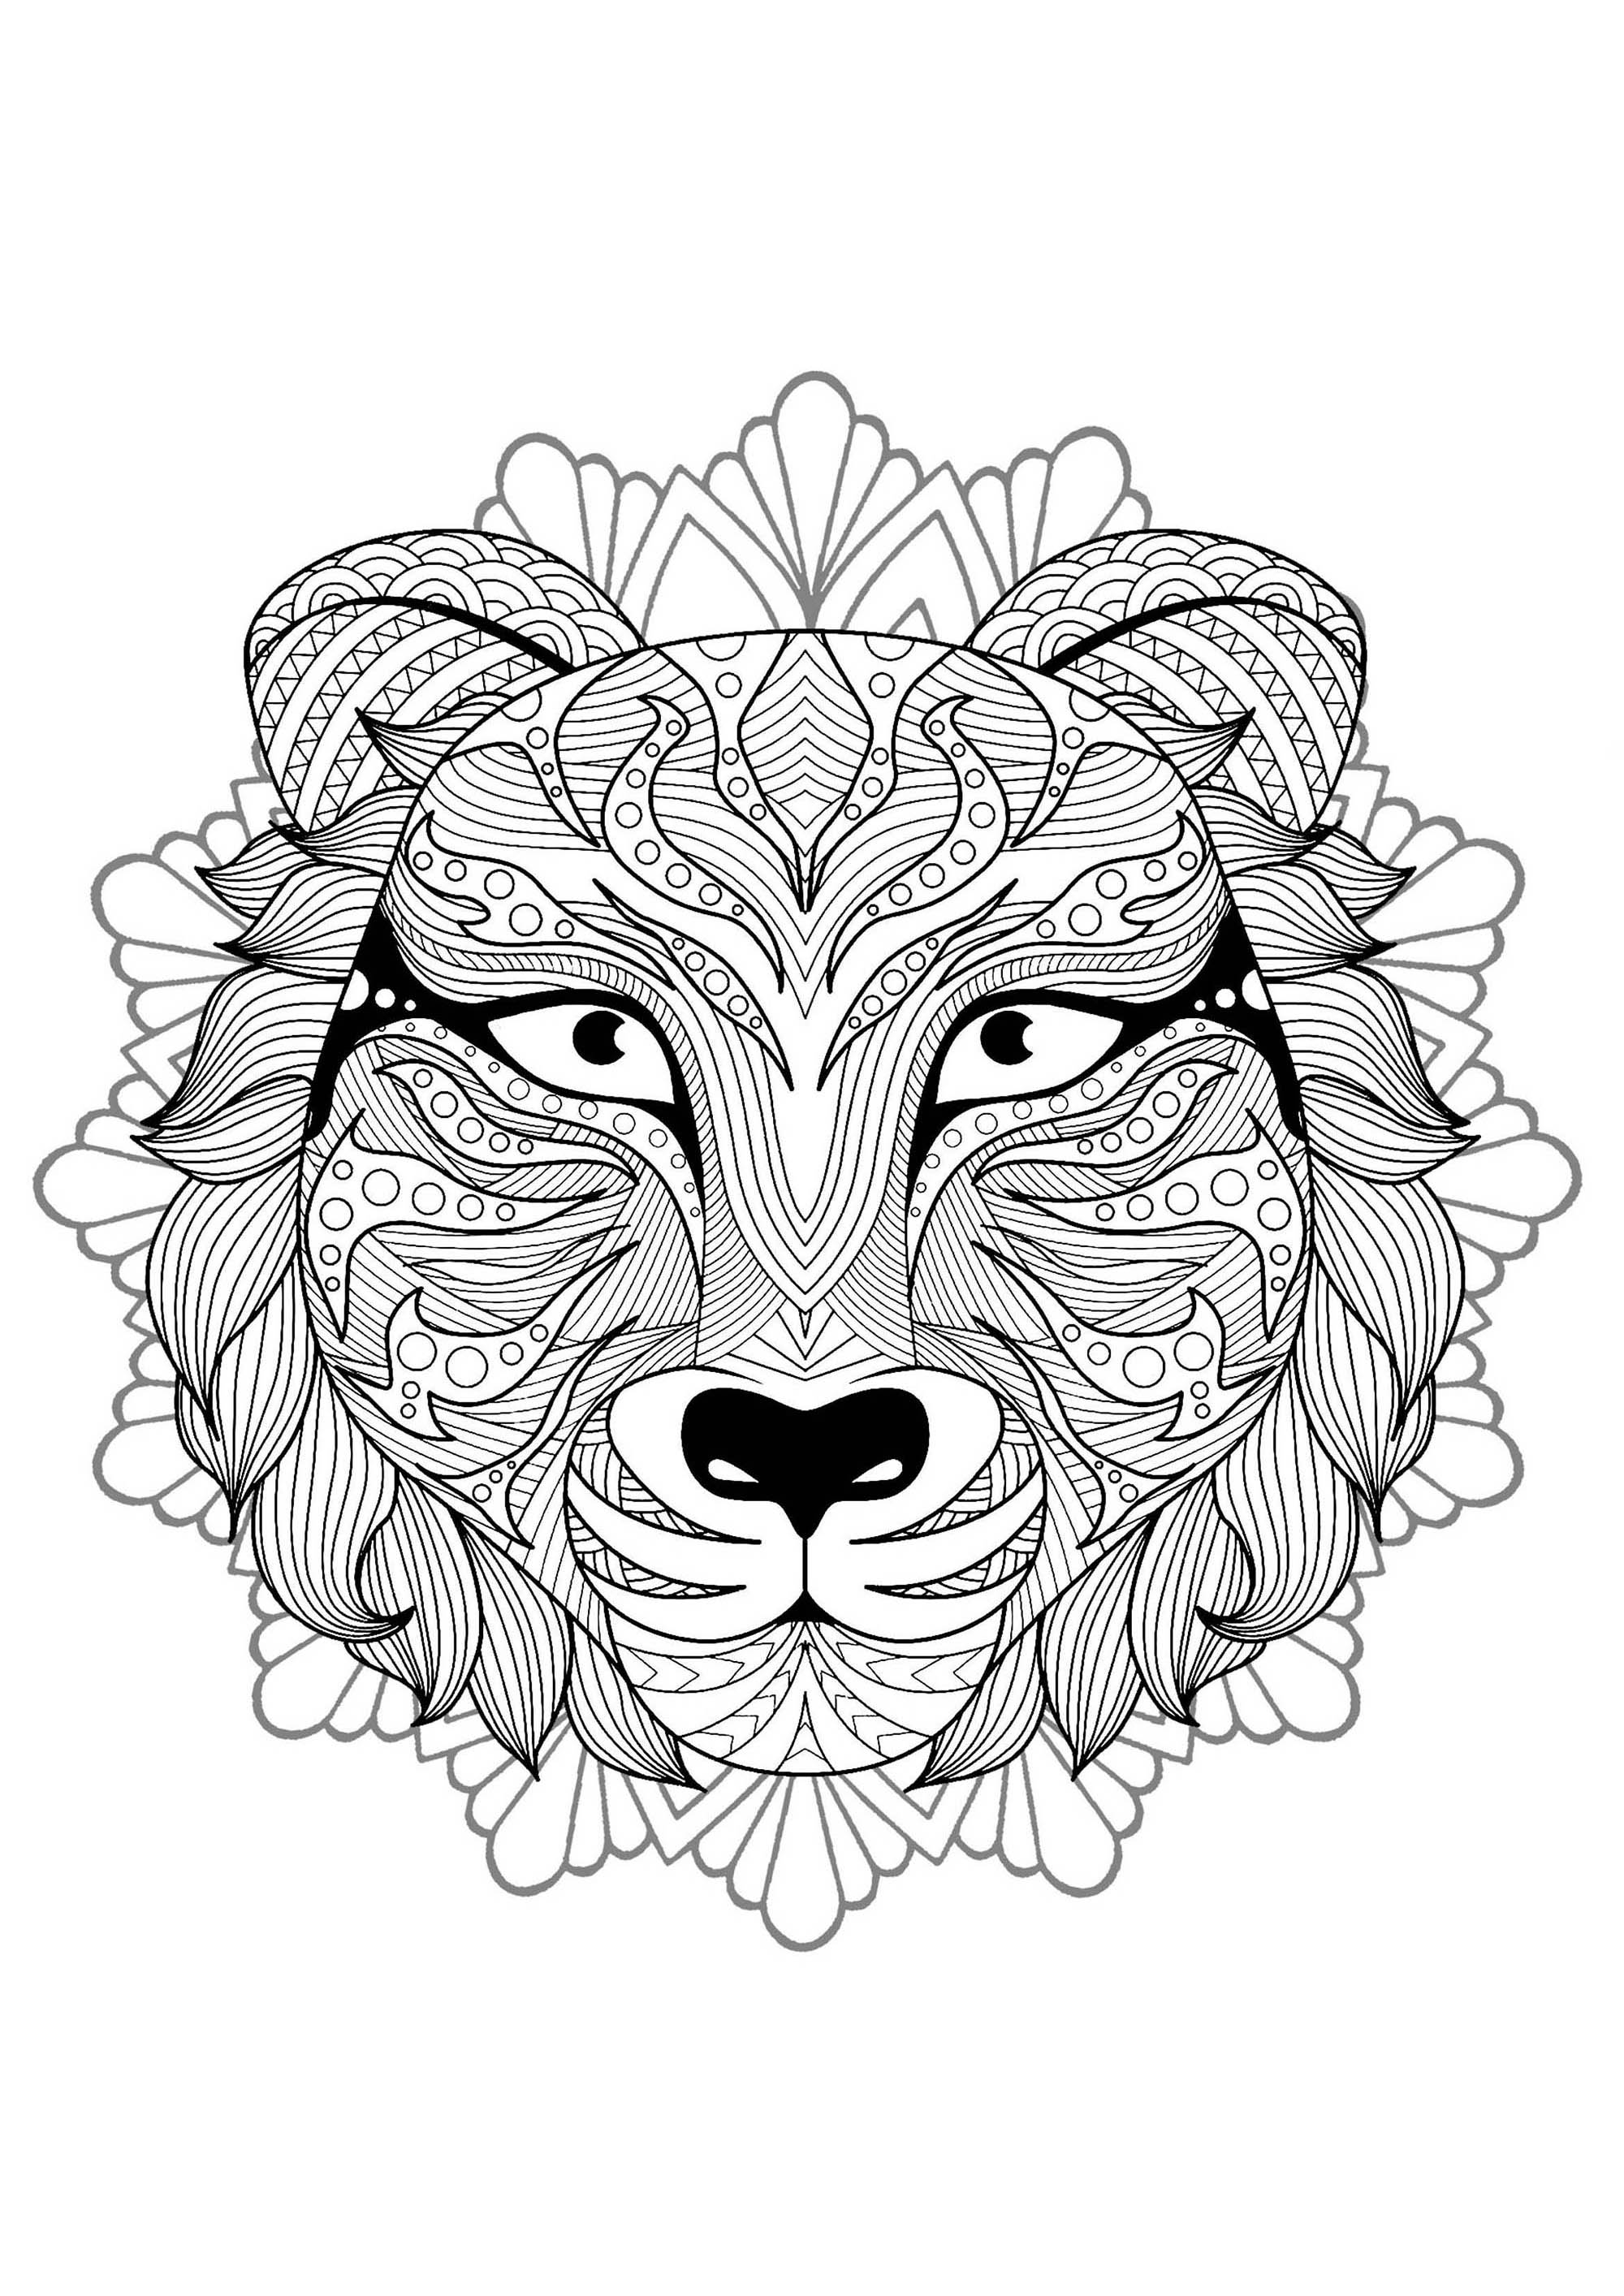 Mandala to color with magnificent Tiger head and floral / rounded patterns in background